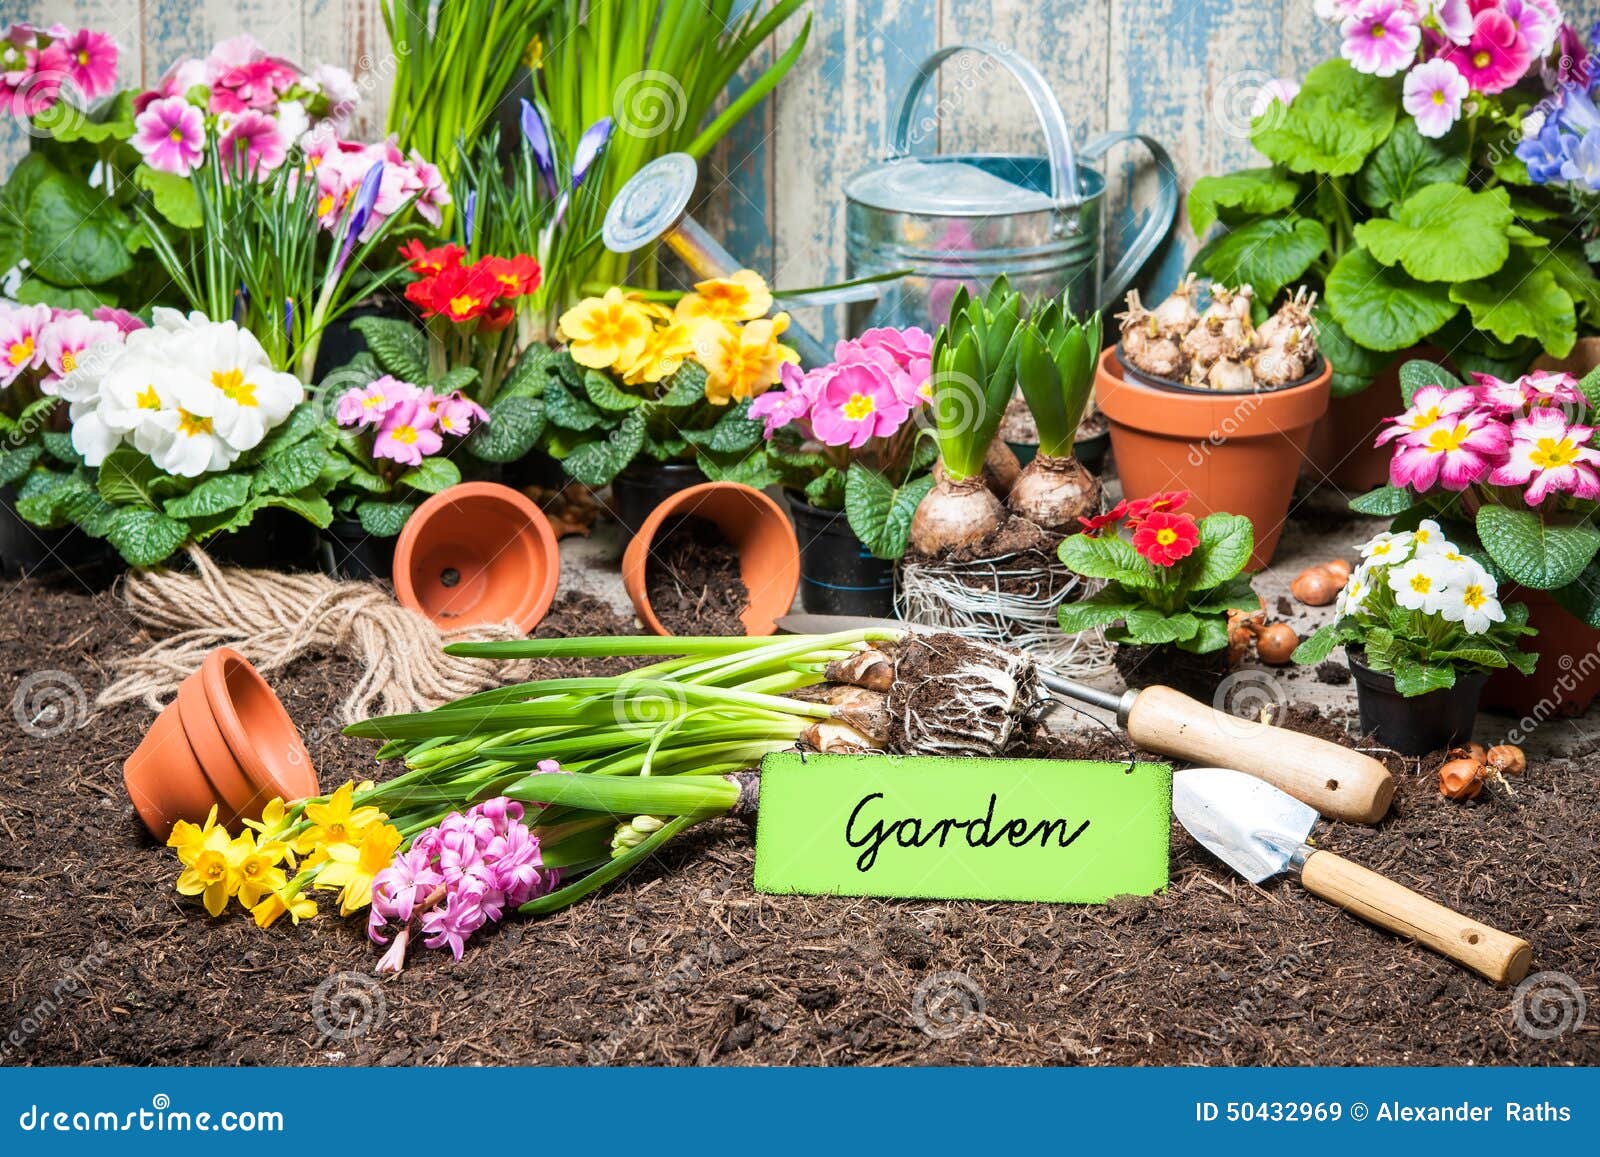 Gardening sign and flowers stock image. Image of cultivate - 50432969